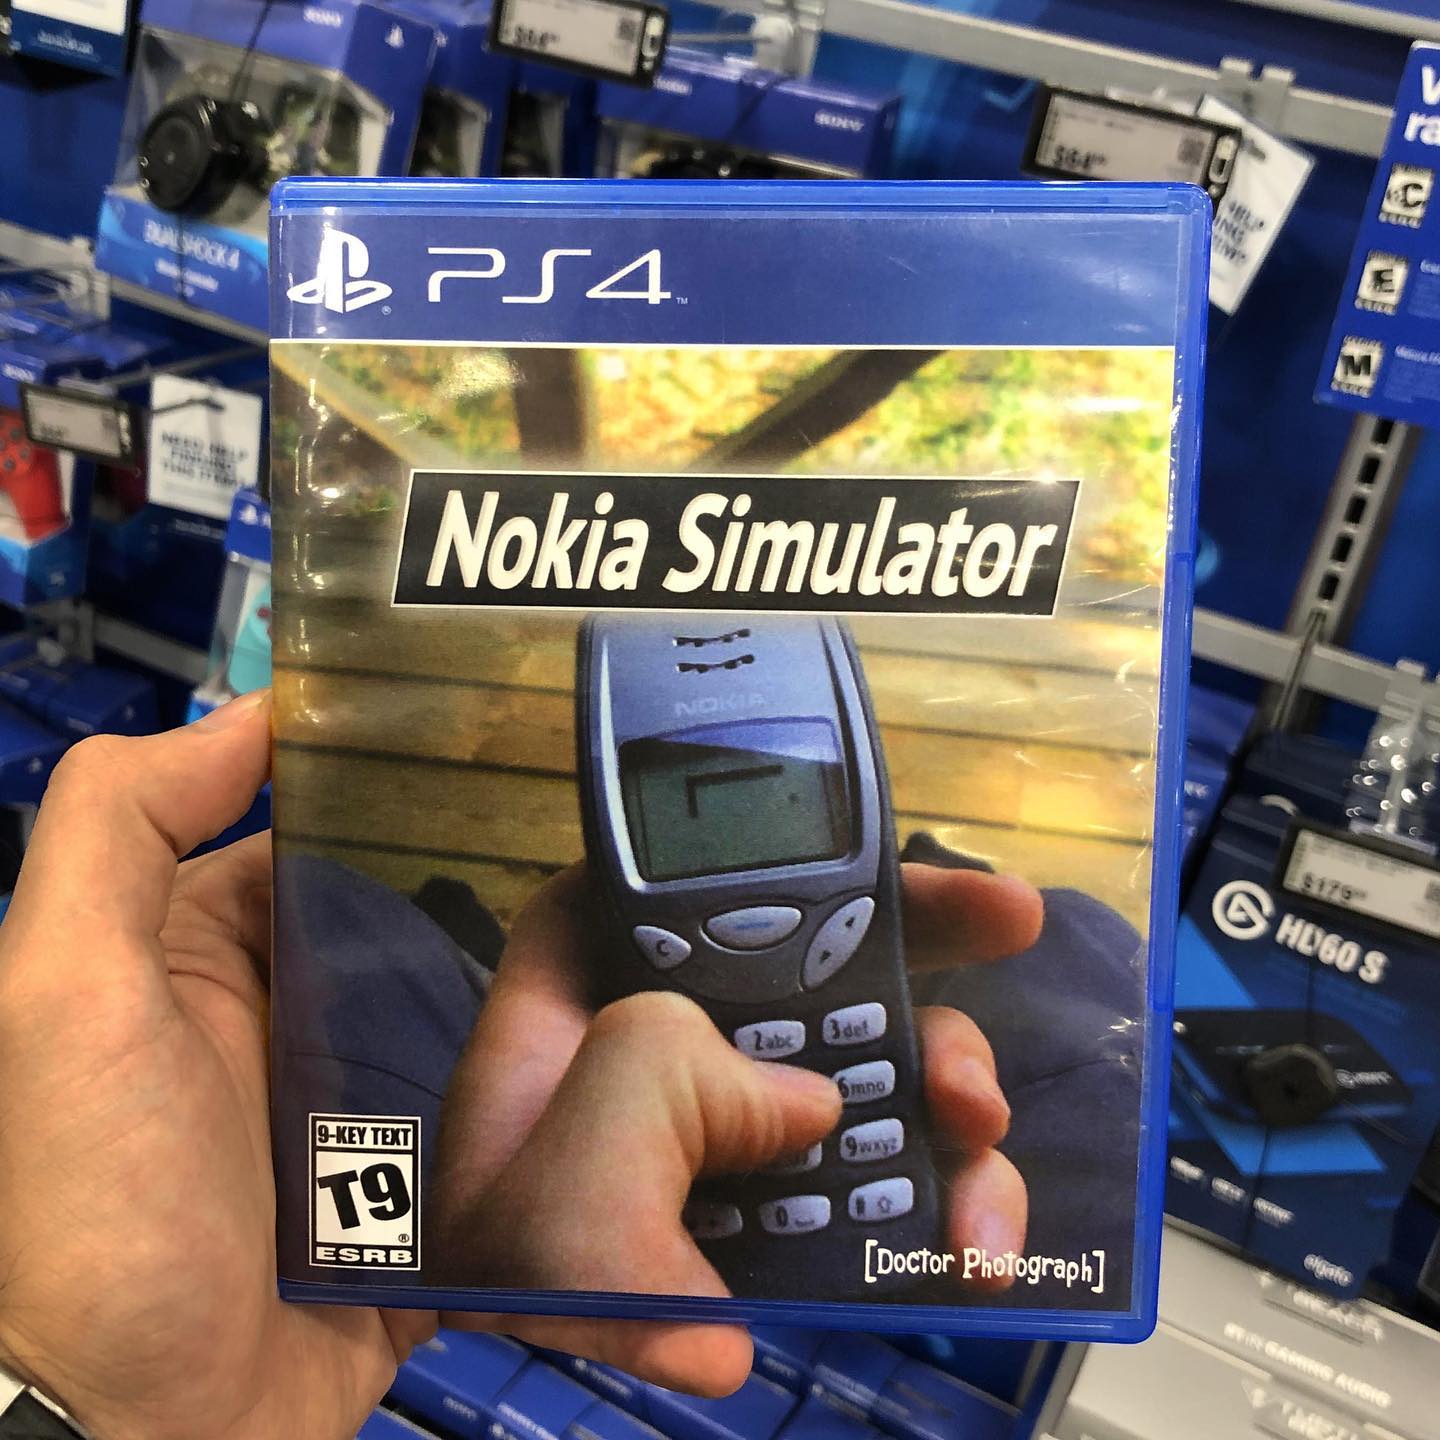 funny pics and randoms - nokia simulator ps4 - 3 Dual HOCK4 9Key Text T9 Esrb PS4 Nokia Simulator Nokia Wing Zabe 3 del Smno 9ways Doctor Photograph Ing W Tam M Shane M Galile Hugo S elgate In Gaming Ausig fear